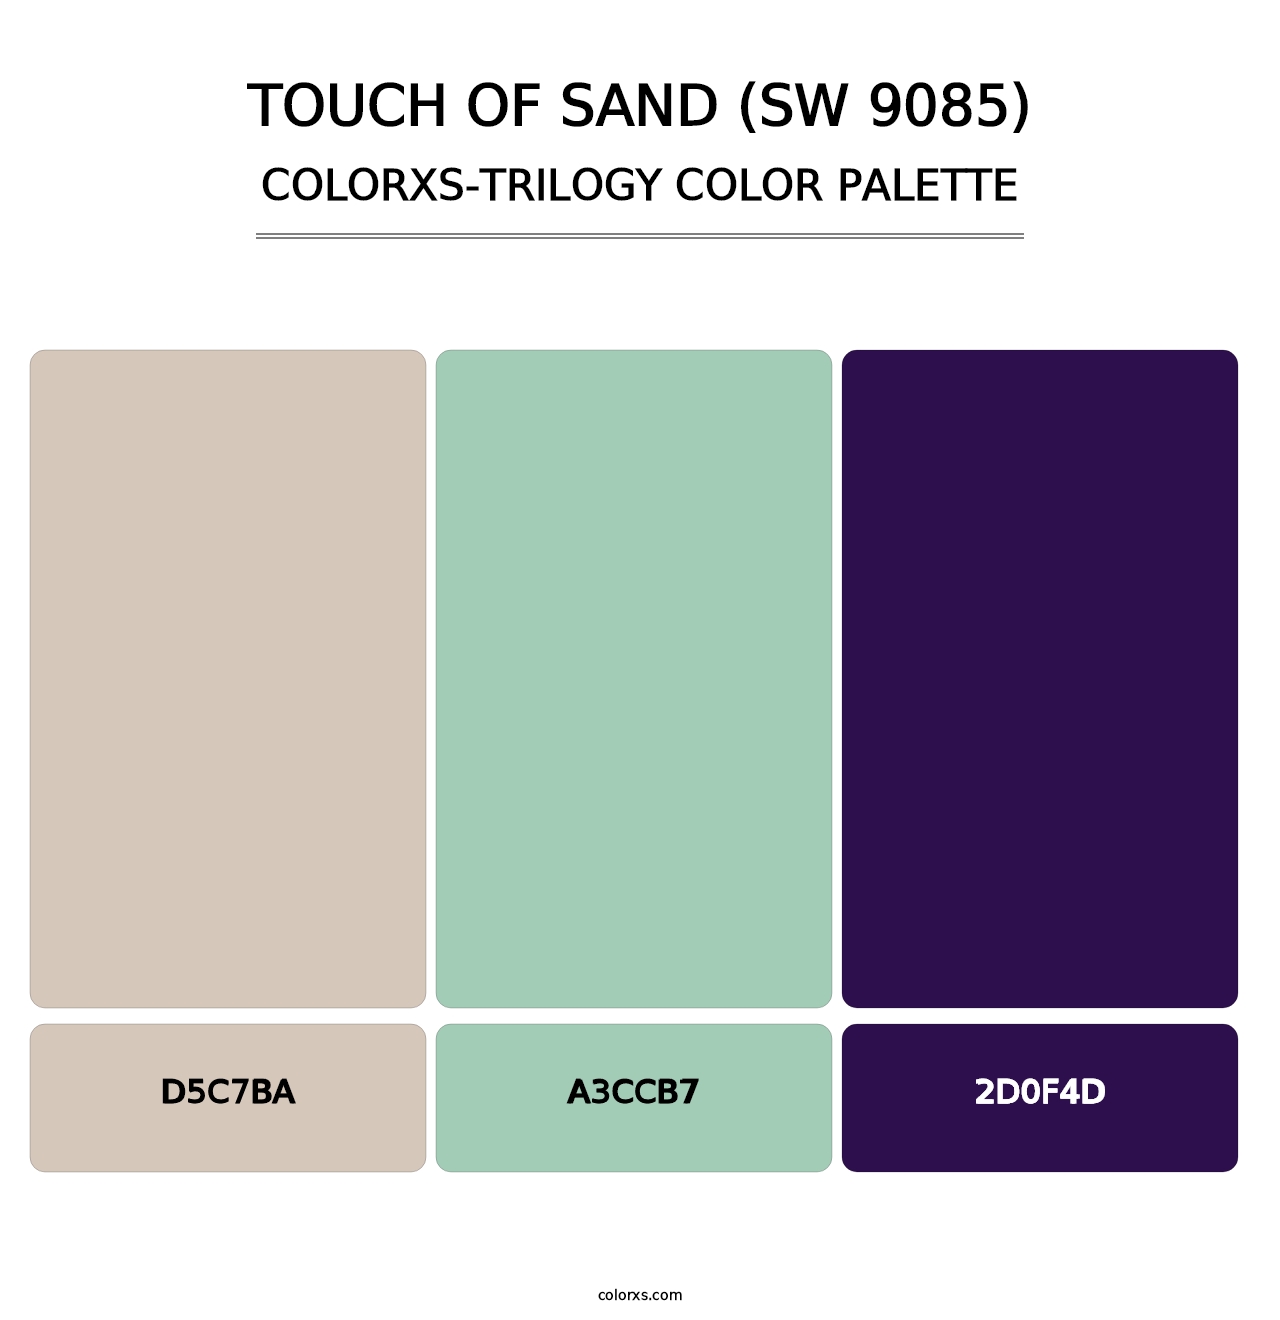 Touch of Sand (SW 9085) - Colorxs Trilogy Palette